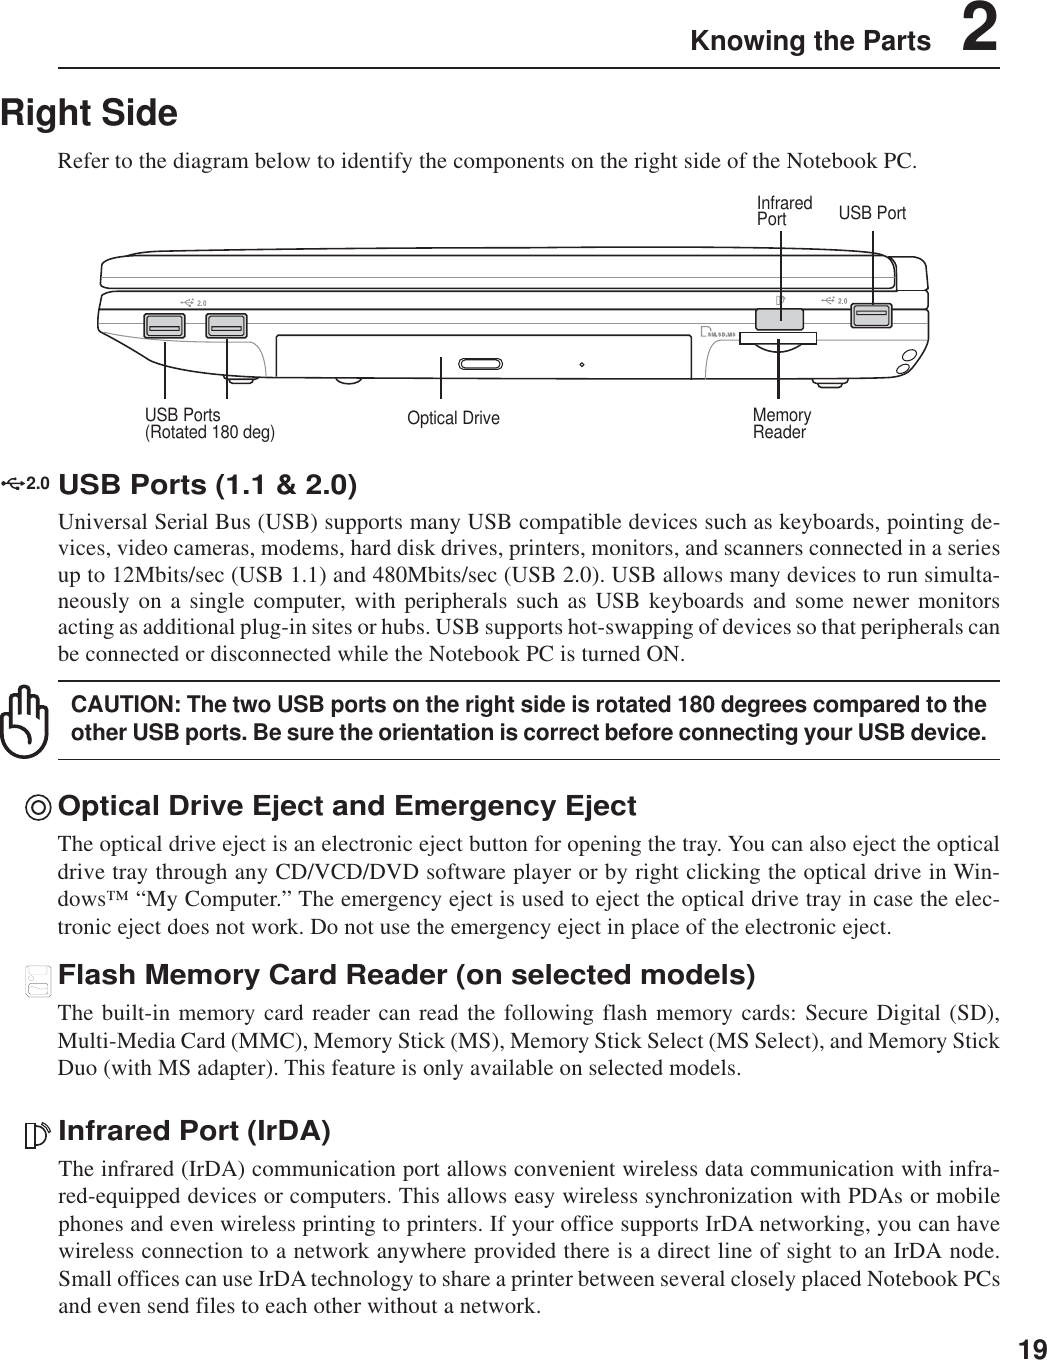 19Knowing the Parts    2Right SideRefer to the diagram below to identify the components on the right side of the Notebook PC.Optical Drive Eject and Emergency EjectThe optical drive eject is an electronic eject button for opening the tray. You can also eject the opticaldrive tray through any CD/VCD/DVD software player or by right clicking the optical drive in Win-dows™ “My Computer.” The emergency eject is used to eject the optical drive tray in case the elec-tronic eject does not work. Do not use the emergency eject in place of the electronic eject.Flash Memory Card Reader (on selected models)The built-in memory card reader can read the following flash memory cards: Secure Digital (SD),Multi-Media Card (MMC), Memory Stick (MS), Memory Stick Select (MS Select), and Memory StickDuo (with MS adapter). This feature is only available on selected models.Infrared Port (IrDA)The infrared (IrDA) communication port allows convenient wireless data communication with infra-red-equipped devices or computers. This allows easy wireless synchronization with PDAs or mobilephones and even wireless printing to printers. If your office supports IrDA networking, you can havewireless connection to a network anywhere provided there is a direct line of sight to an IrDA node.Small offices can use IrDA technology to share a printer between several closely placed Notebook PCsand even send files to each other without a network.MemoryReaderInfraredPortUSB Ports(Rotated 180 deg)USB PortOptical Drive2.0USB Ports (1.1 &amp; 2.0)Universal Serial Bus (USB) supports many USB compatible devices such as keyboards, pointing de-vices, video cameras, modems, hard disk drives, printers, monitors, and scanners connected in a seriesup to 12Mbits/sec (USB 1.1) and 480Mbits/sec (USB 2.0). USB allows many devices to run simulta-neously on a single computer, with peripherals such as USB keyboards and some newer monitorsacting as additional plug-in sites or hubs. USB supports hot-swapping of devices so that peripherals canbe connected or disconnected while the Notebook PC is turned ON.CAUTION: The two USB ports on the right side is rotated 180 degrees compared to theother USB ports. Be sure the orientation is correct before connecting your USB device.